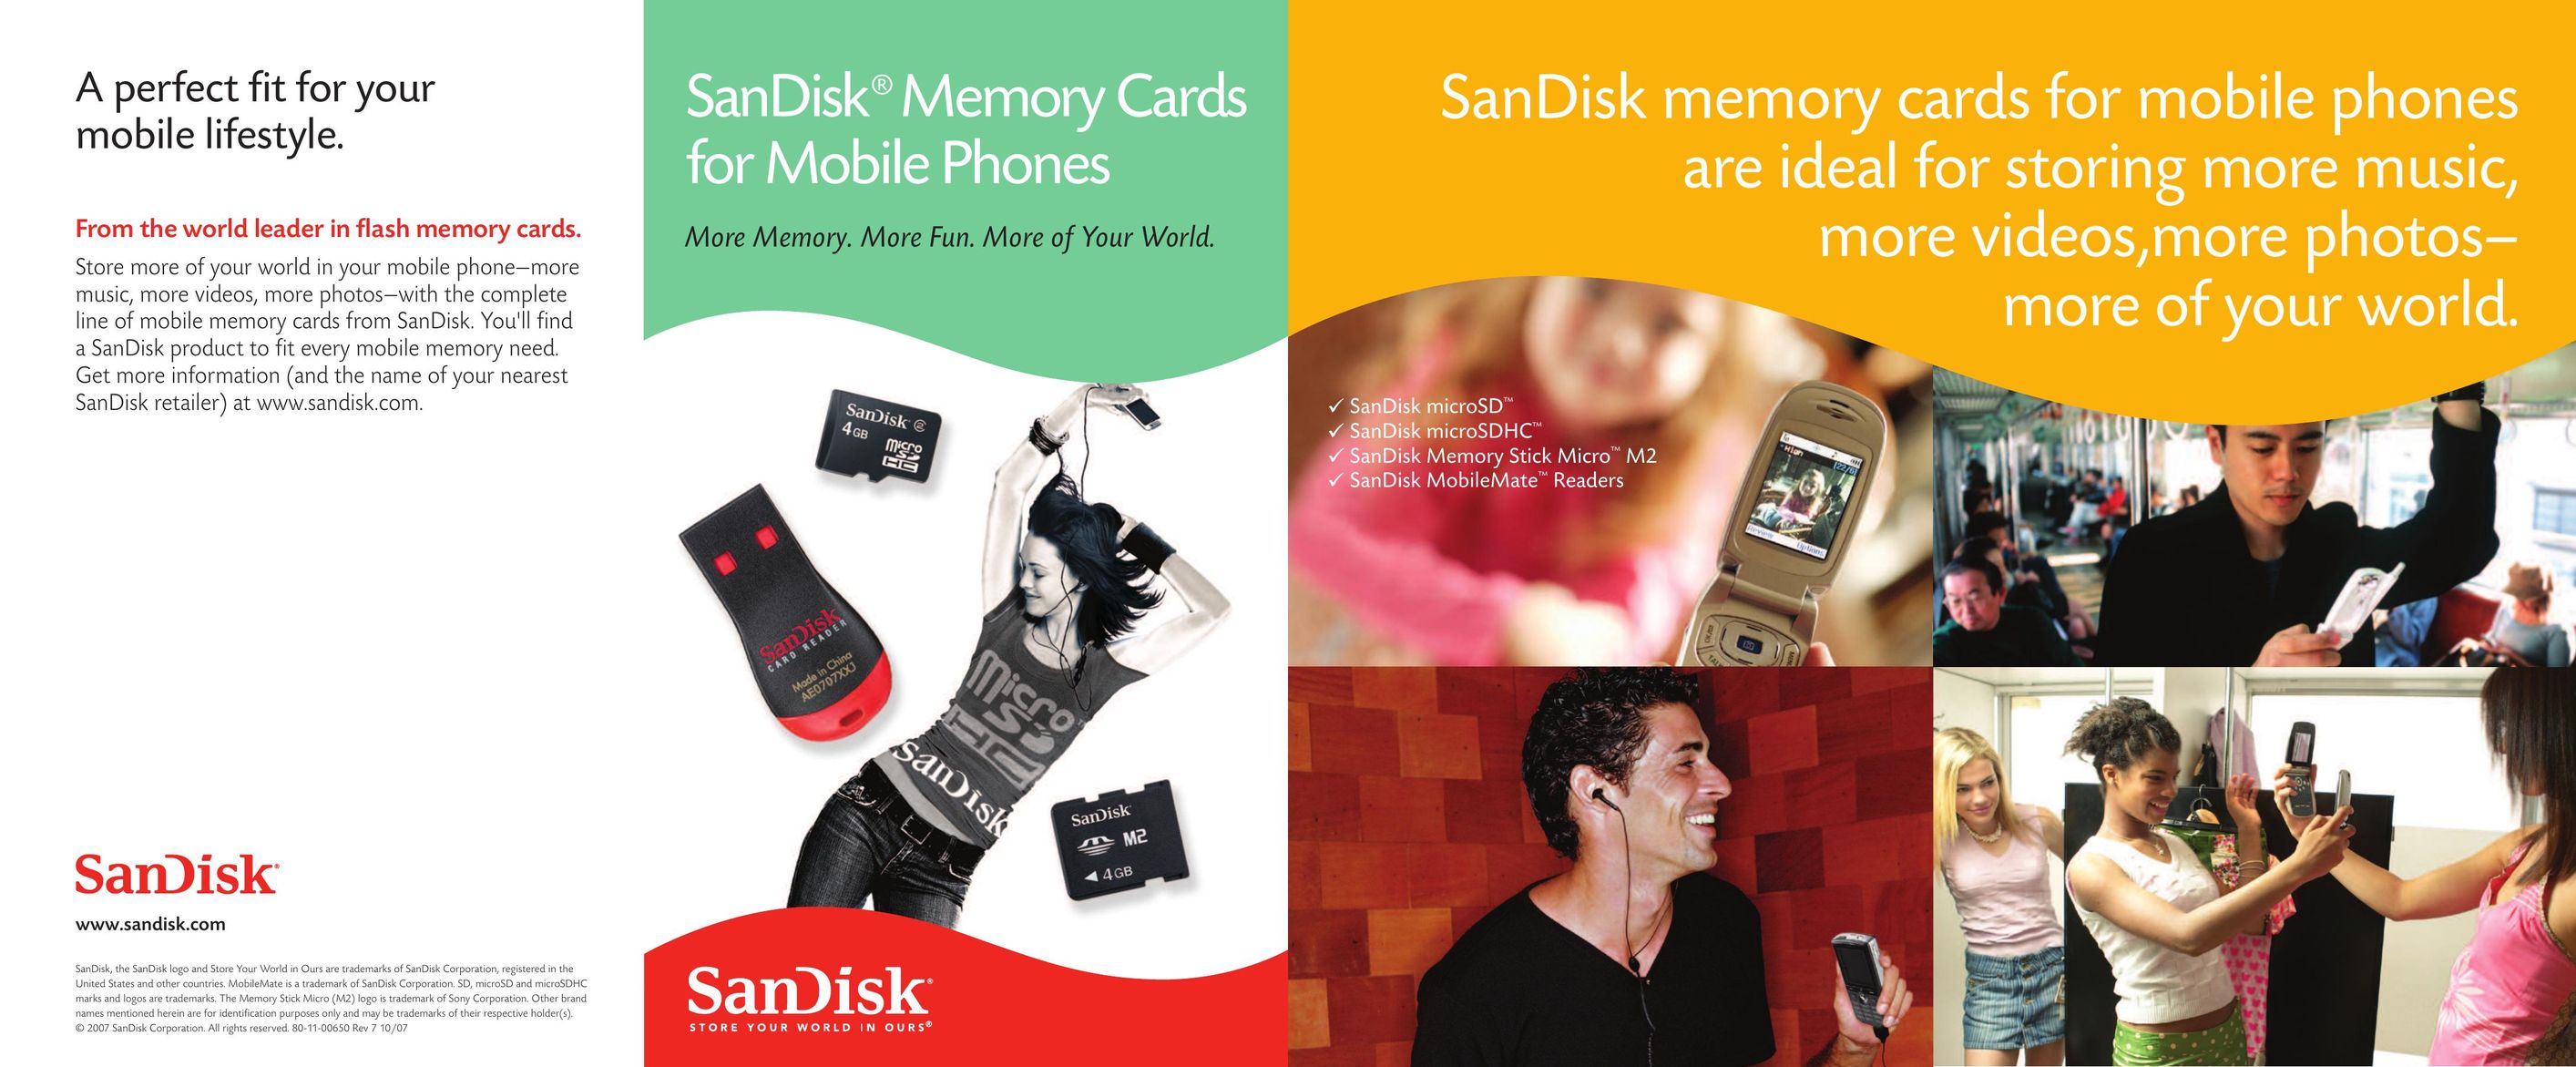 SanDisk microSDHC Cell Phone Accessories User Manual